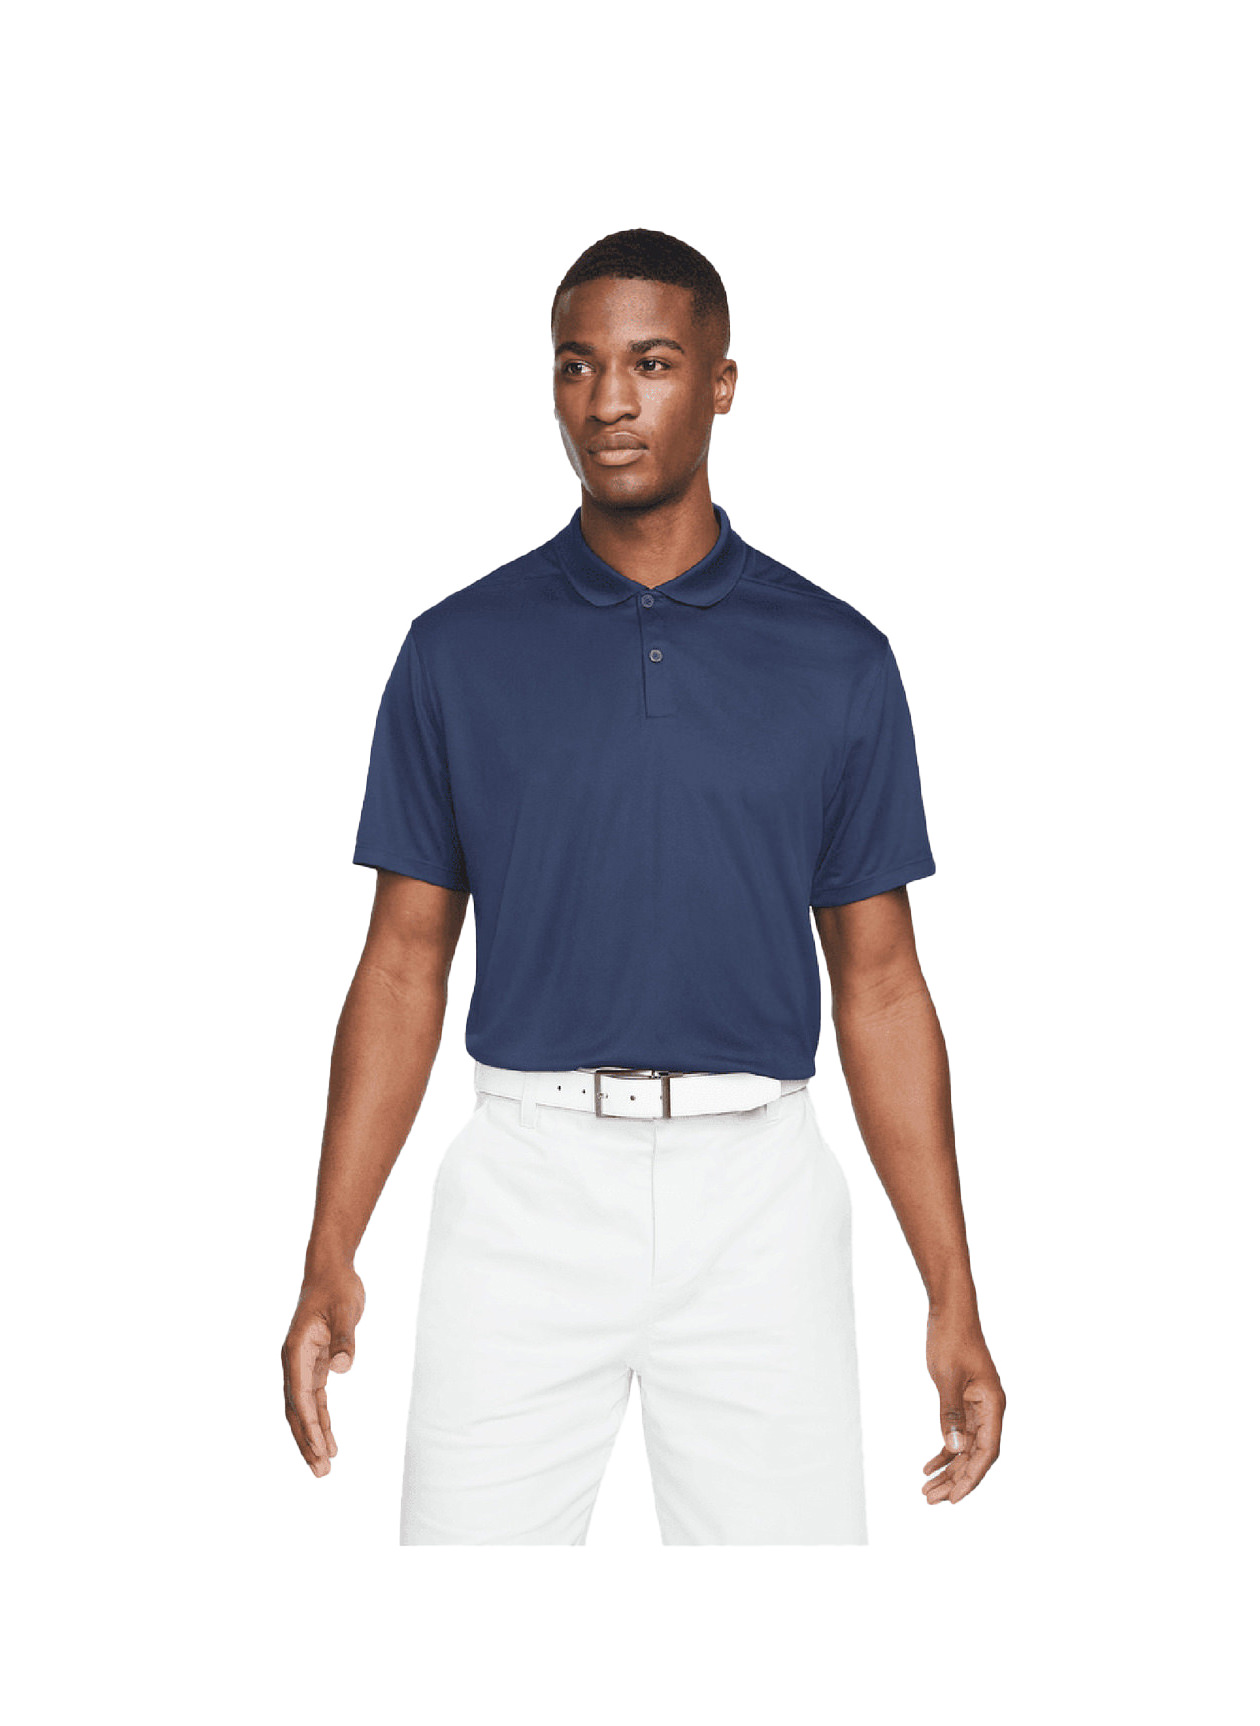 Nike Men's College Navy-White Dri-FIT Victory Solid Polo | Customized ...